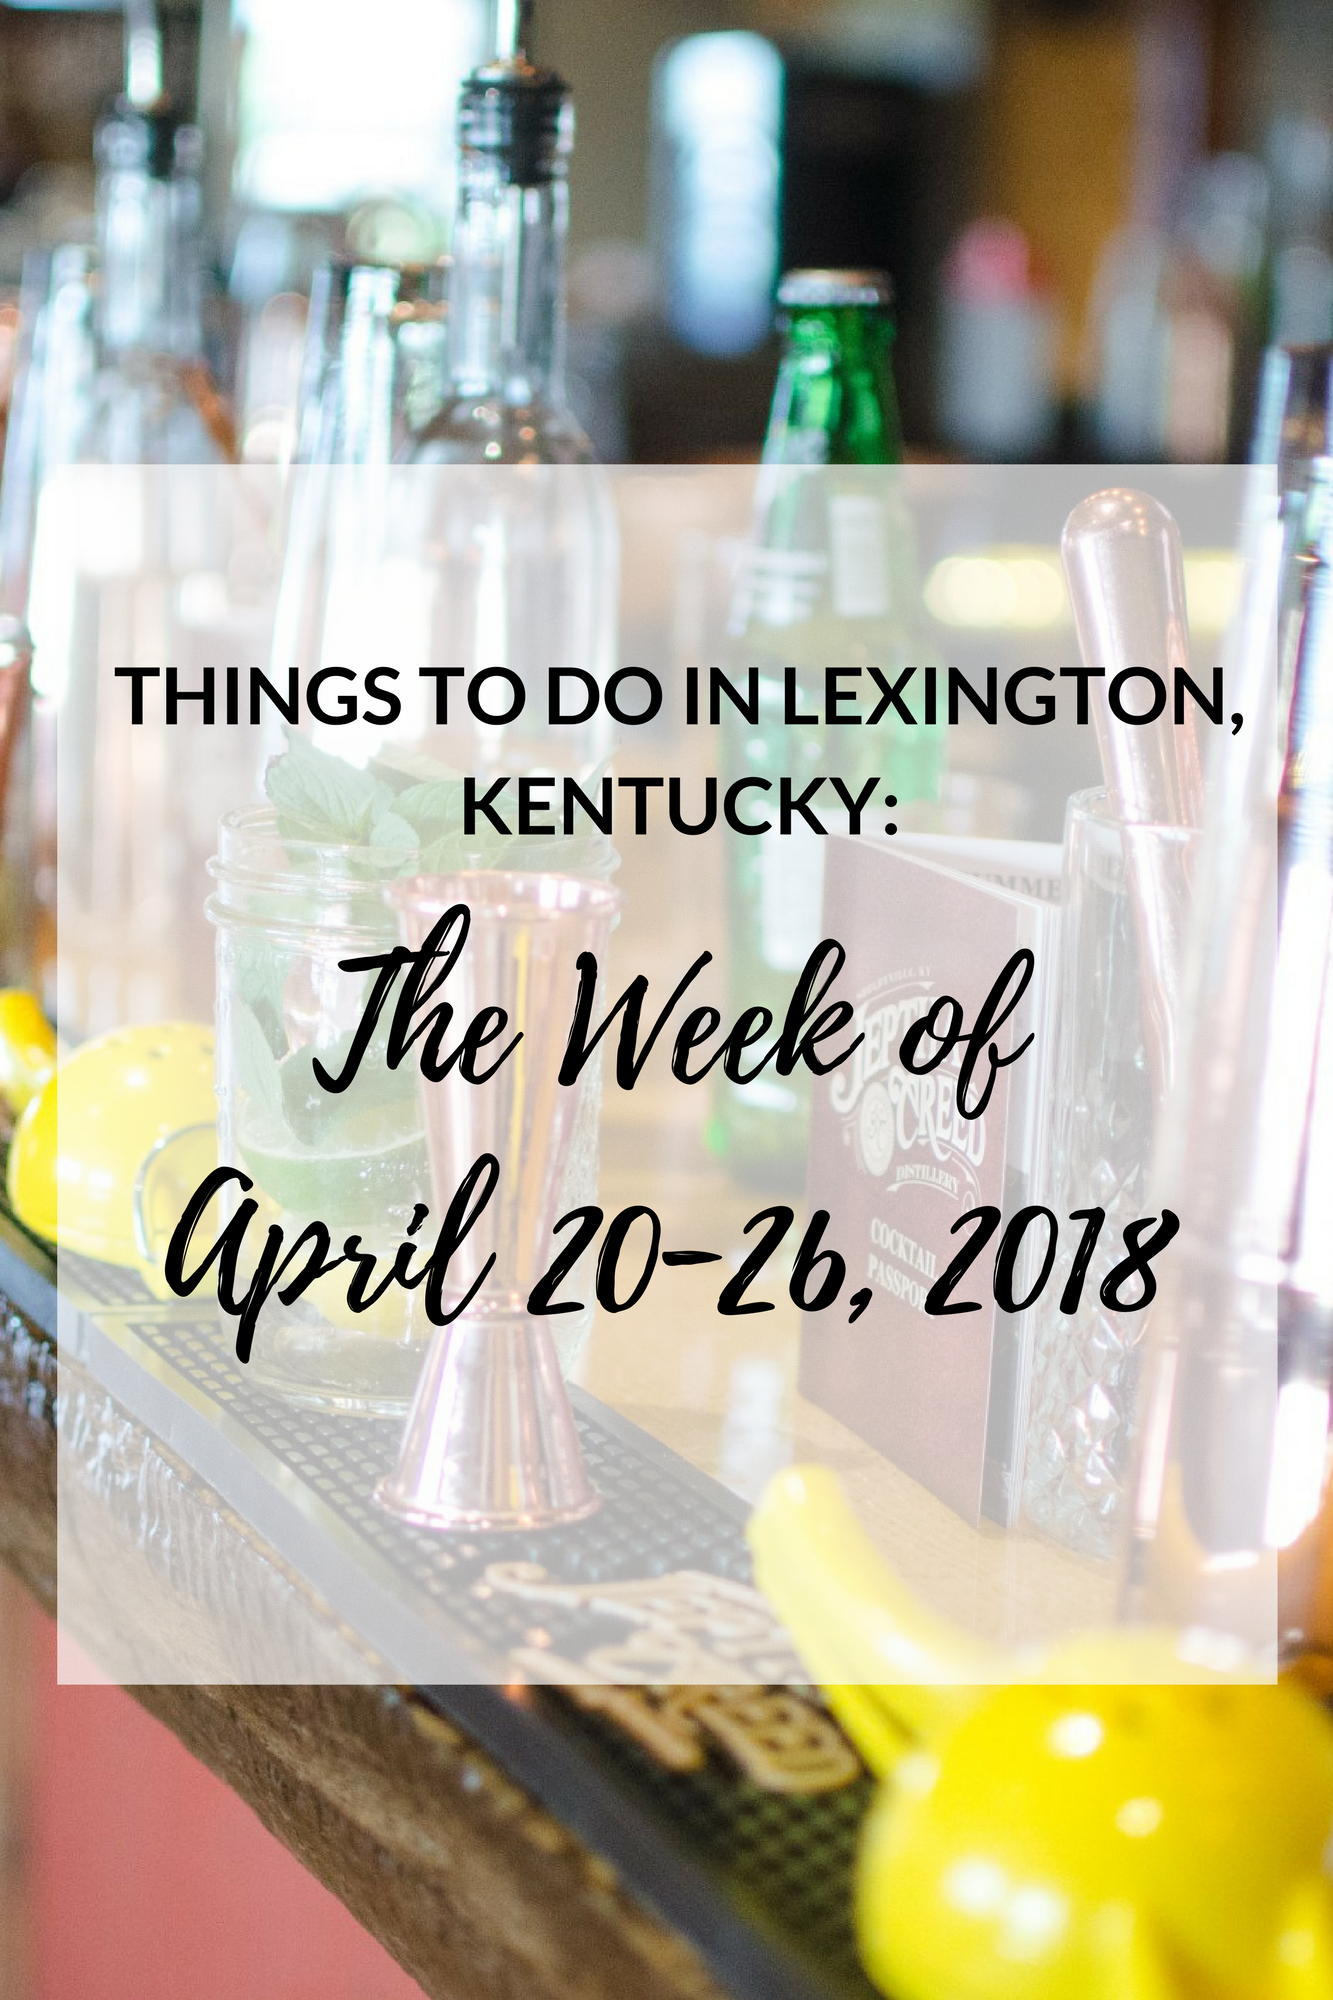 It's Friday! Here is another list of some events happening in the coming week in Lexington, Kentucky. There's a little something for everyone, and some of these events are bound to keep you entertained! #sharethelex #lexingtonky #kentucky #travelky #travel #visitlex